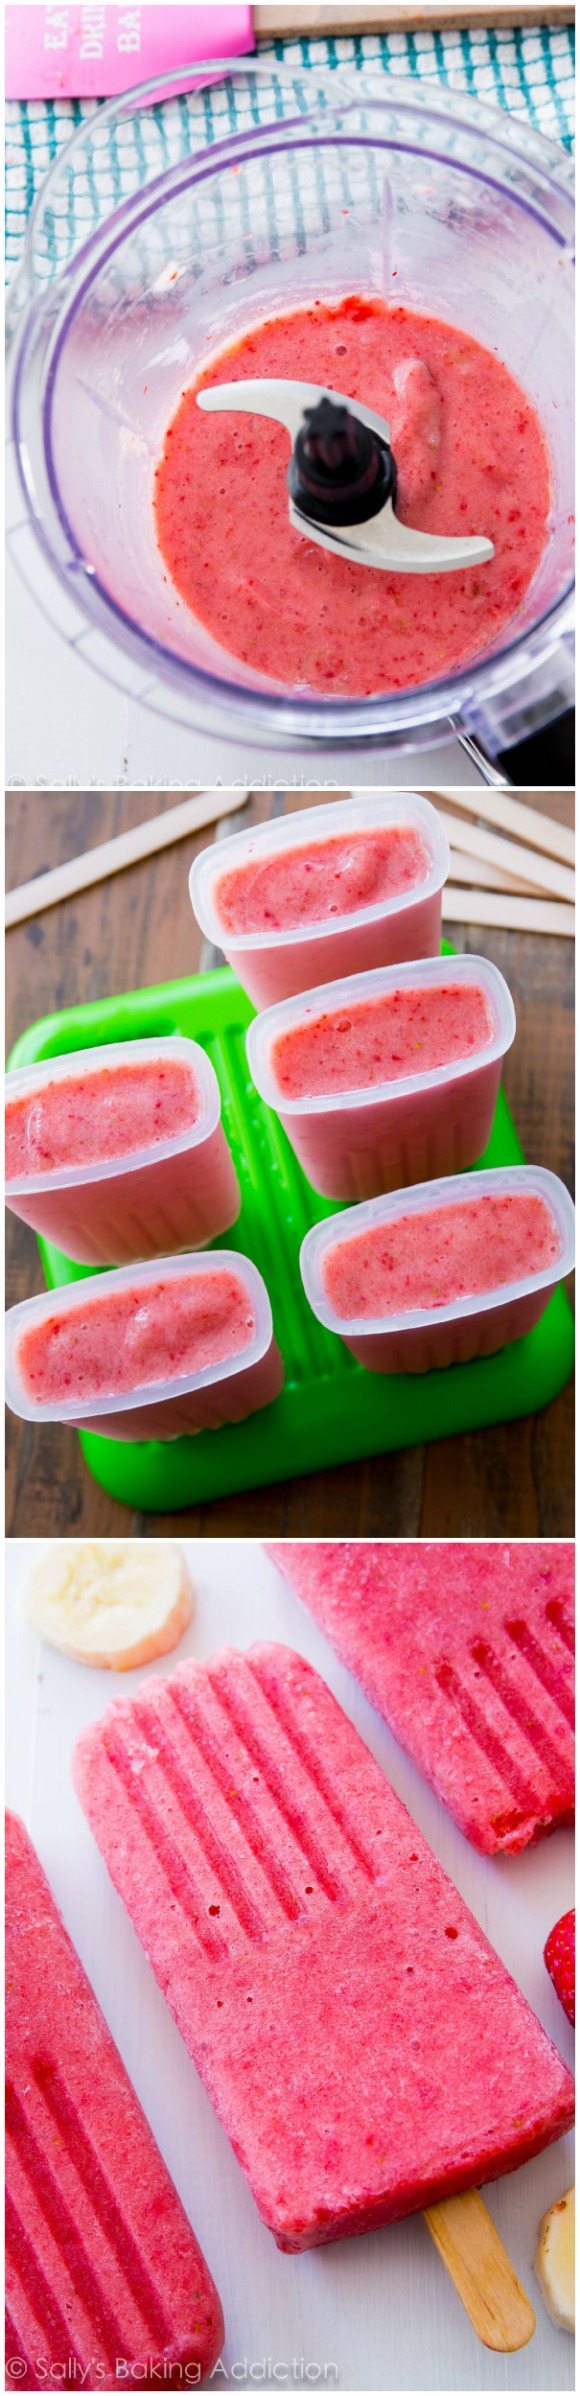 3 images of strawberry banana popsicle mixture in a blender and in popsicle molds and frozen popsicles